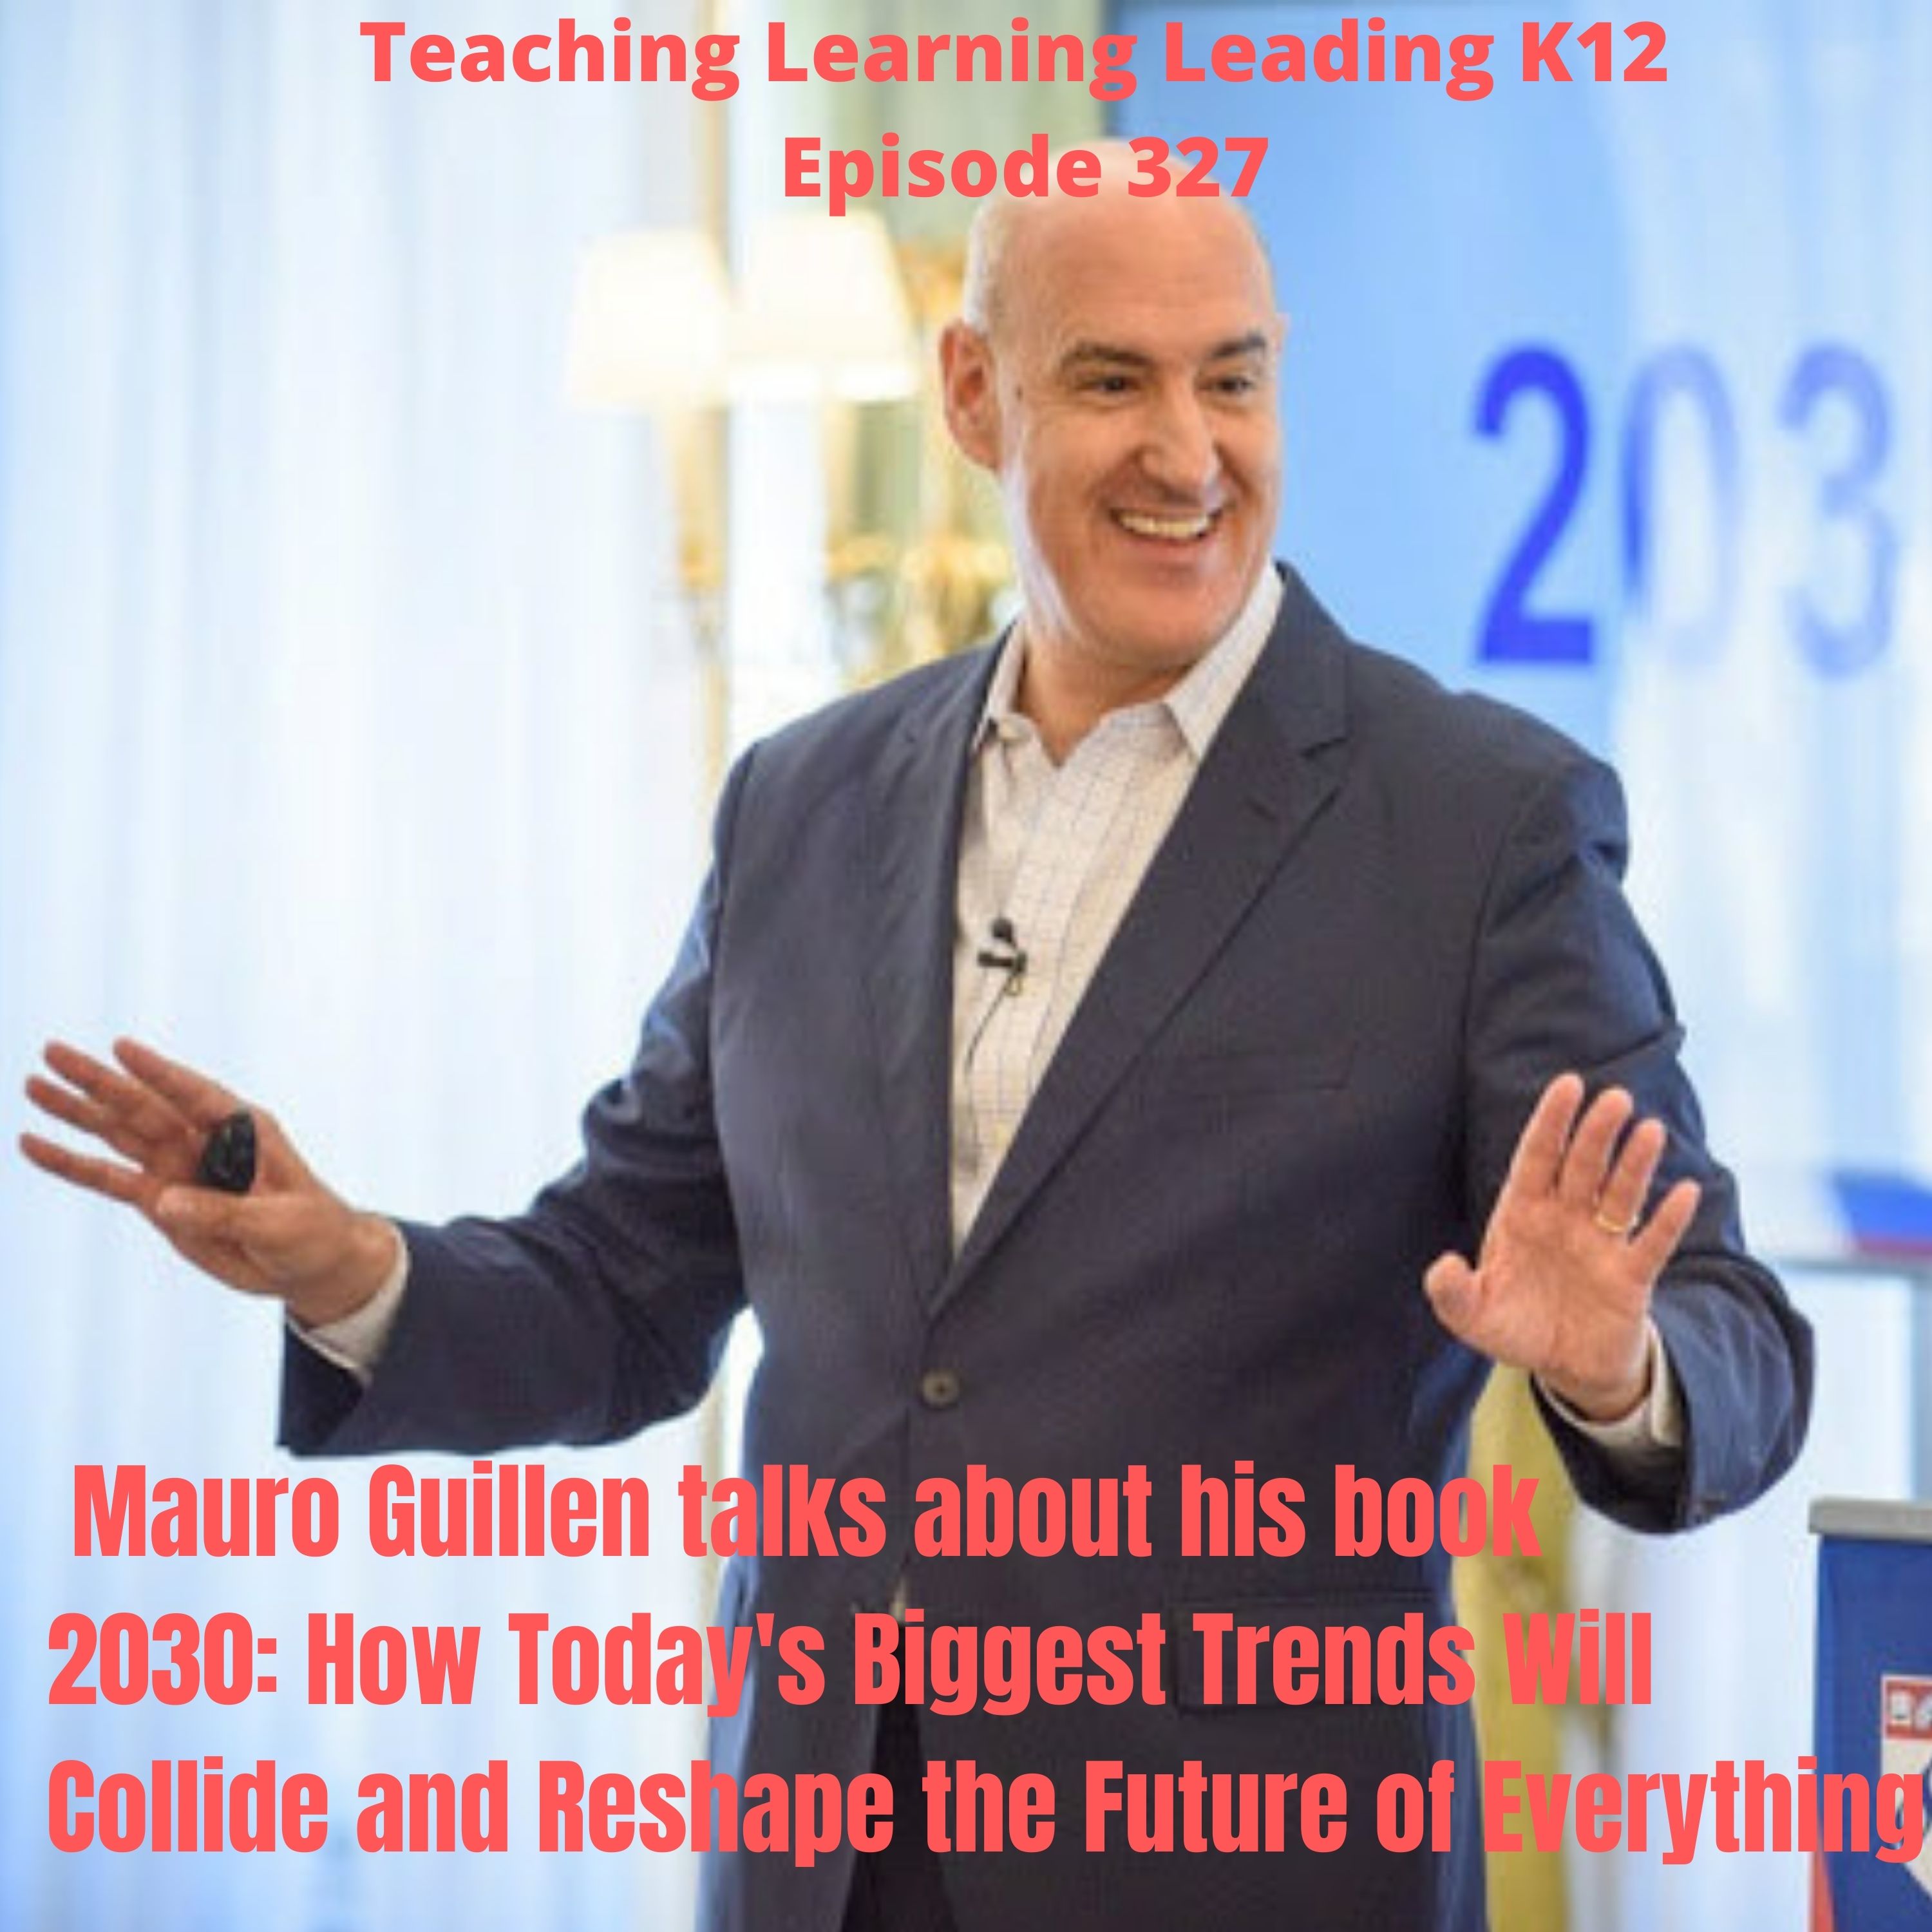 Mauro Guillen talks about his book 2030: How Today's Biggest Trends Will Collide and Reshape the Future of Everything - 327 Image